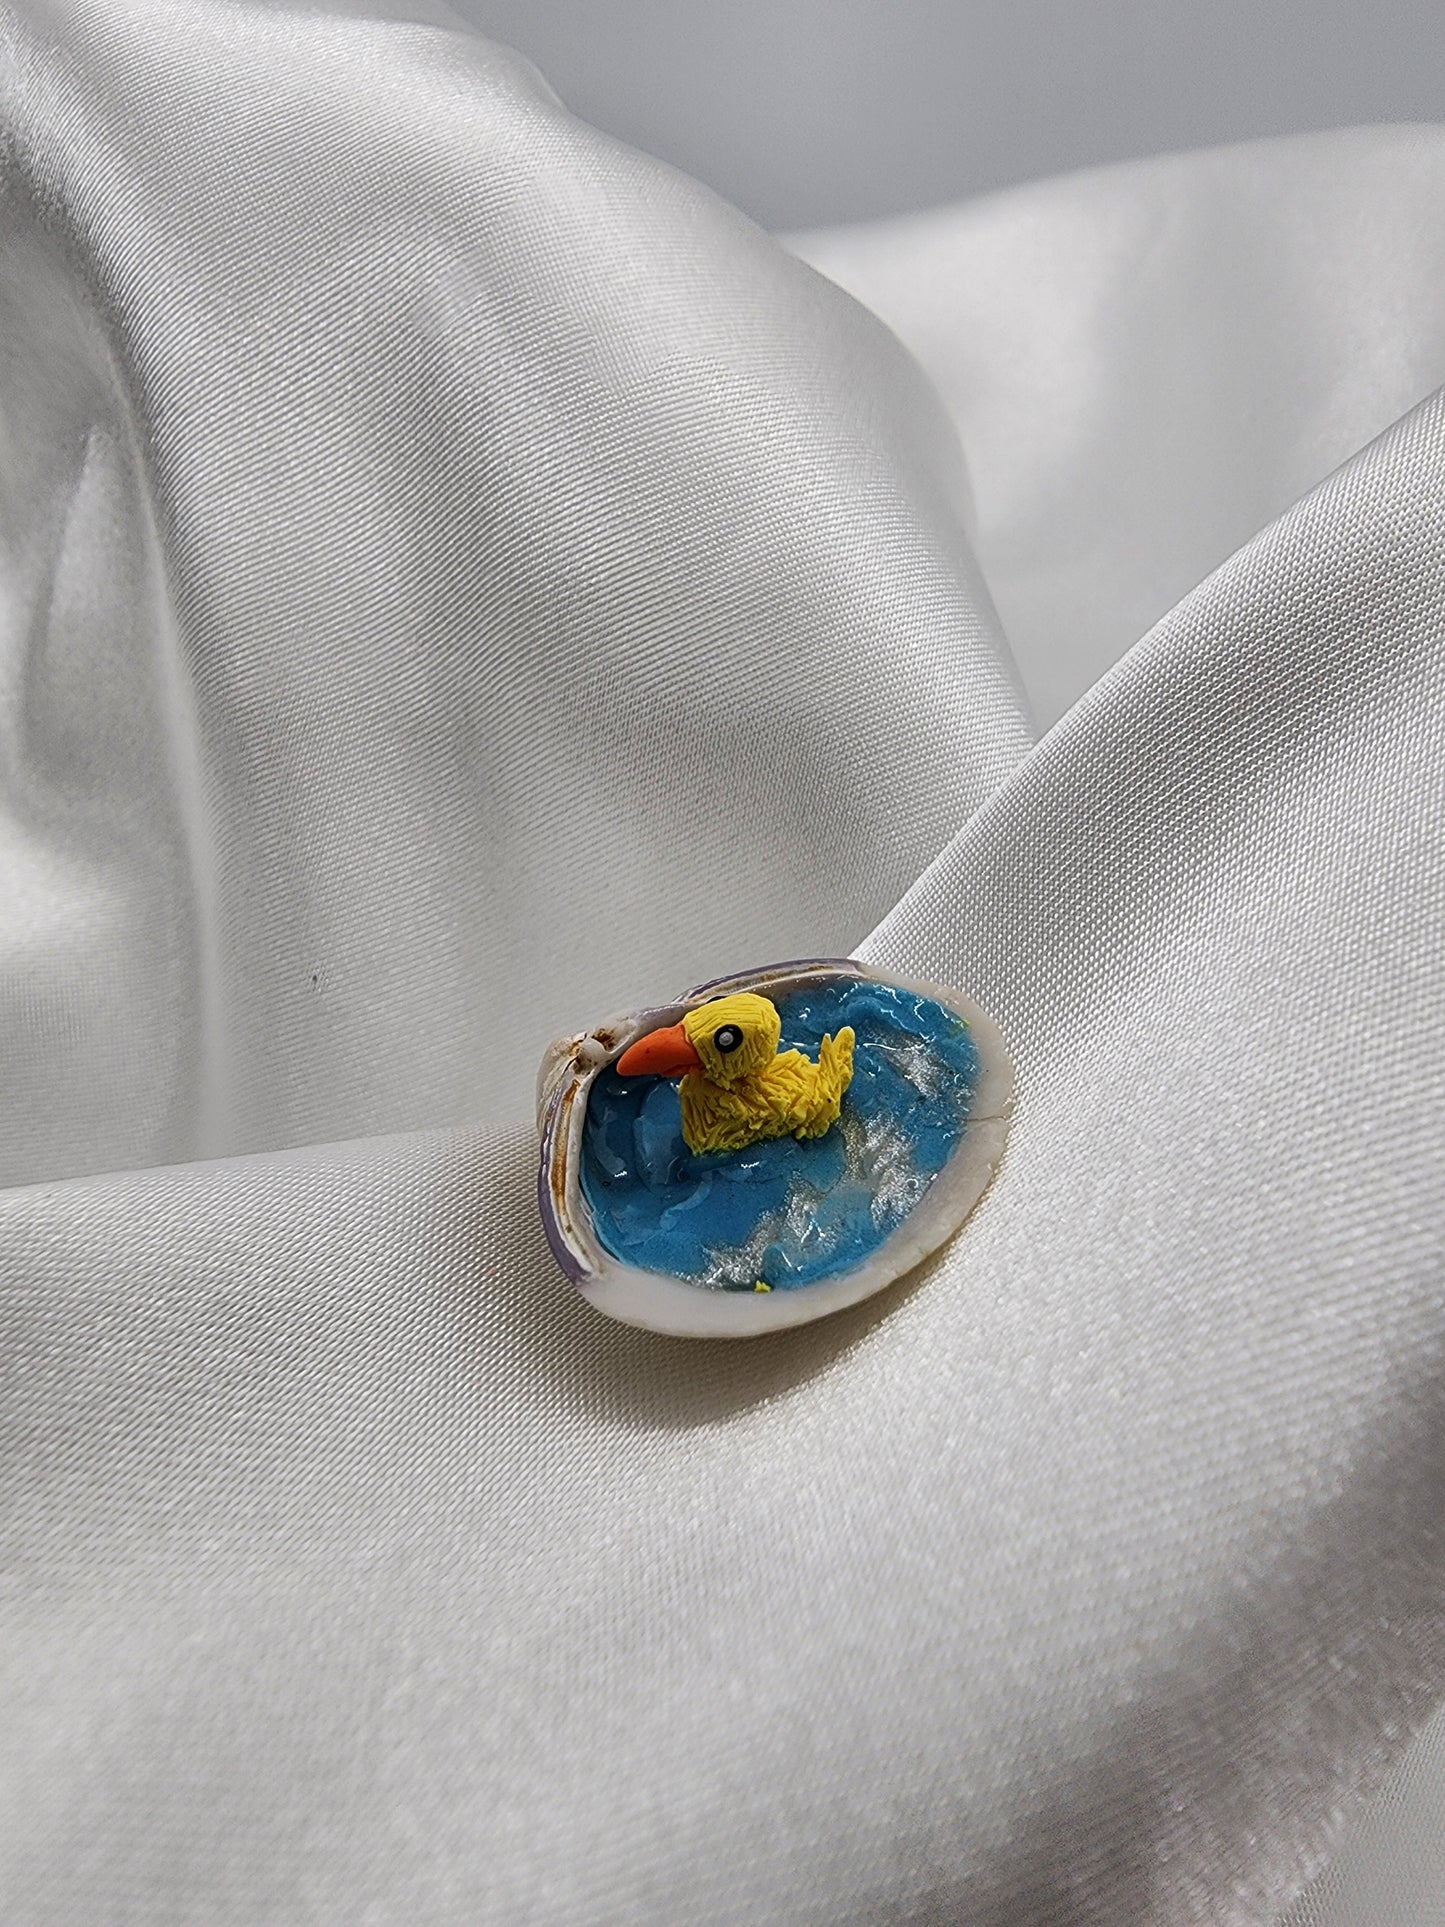 Ugly Duckling inside a Seashell Tiny Sculpture